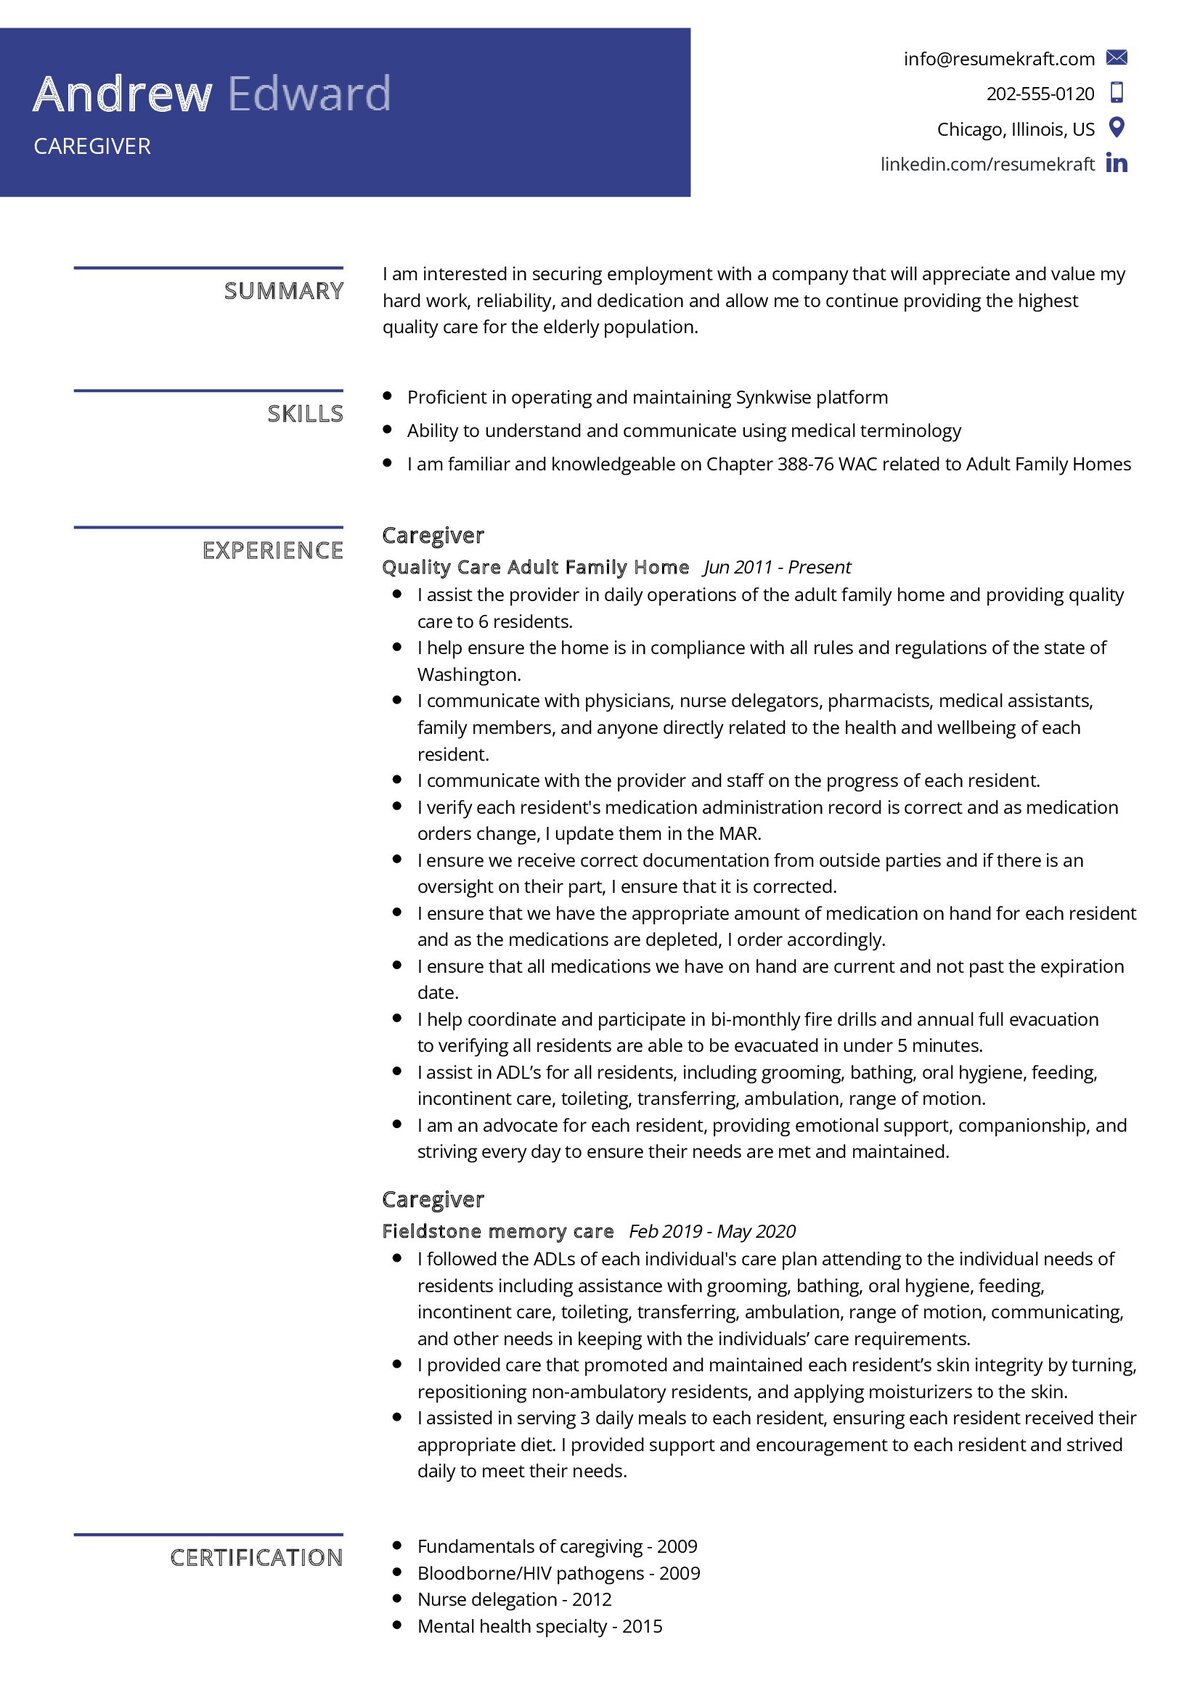 resume examples for caregiver skills